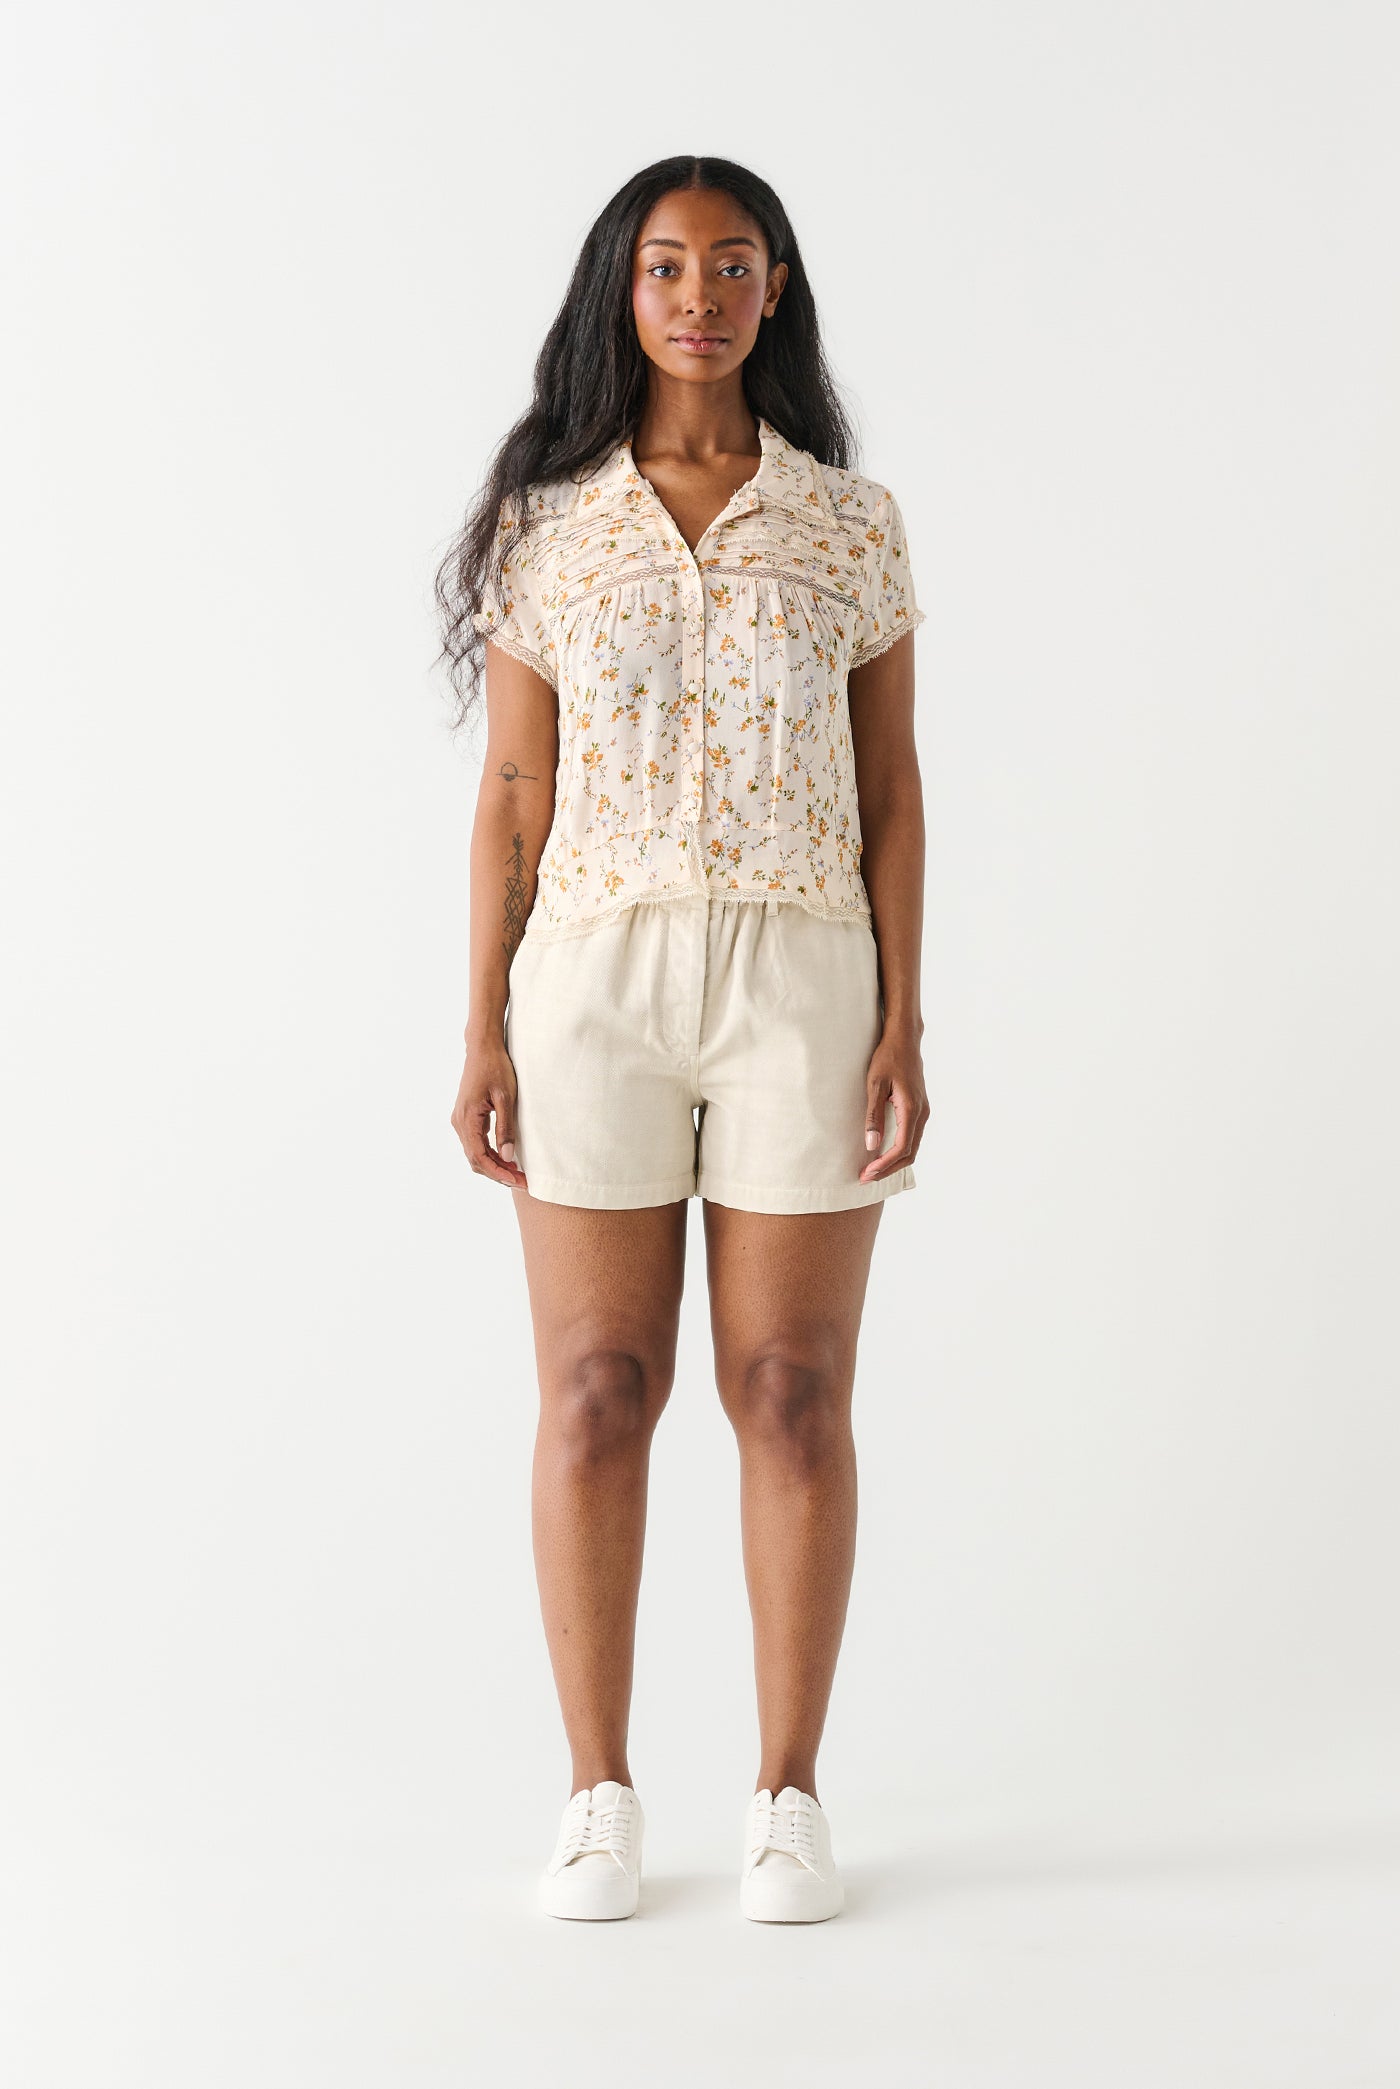 Golden Bloom Crochet Insert Blouse-Short Sleeves-Vixen Collection, Day Spa and Women's Boutique Located in Seattle, Washington